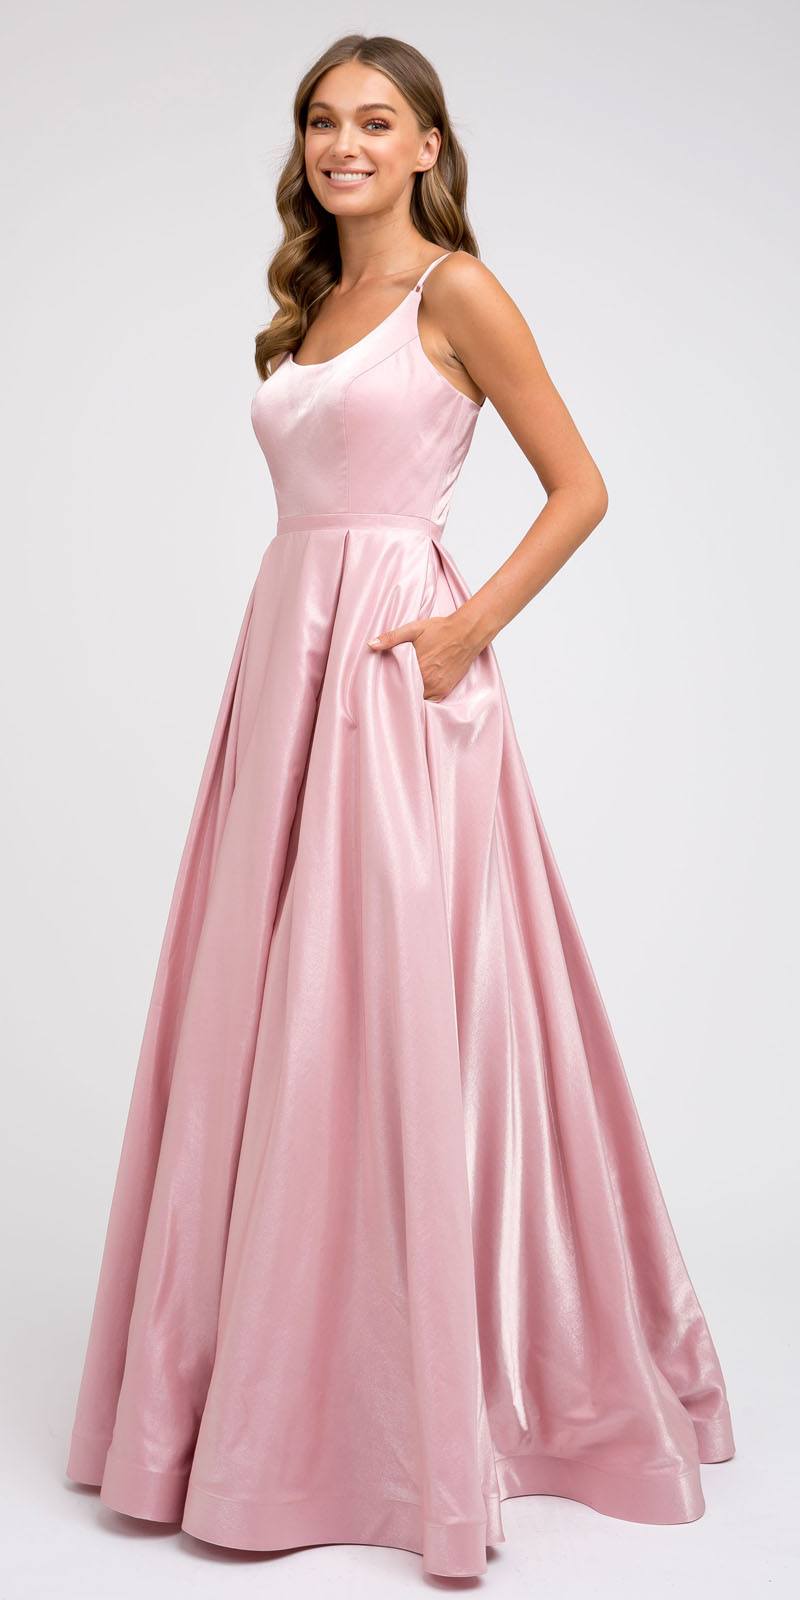 Strappy-Back Mauve Long Prom Dress with Pockets